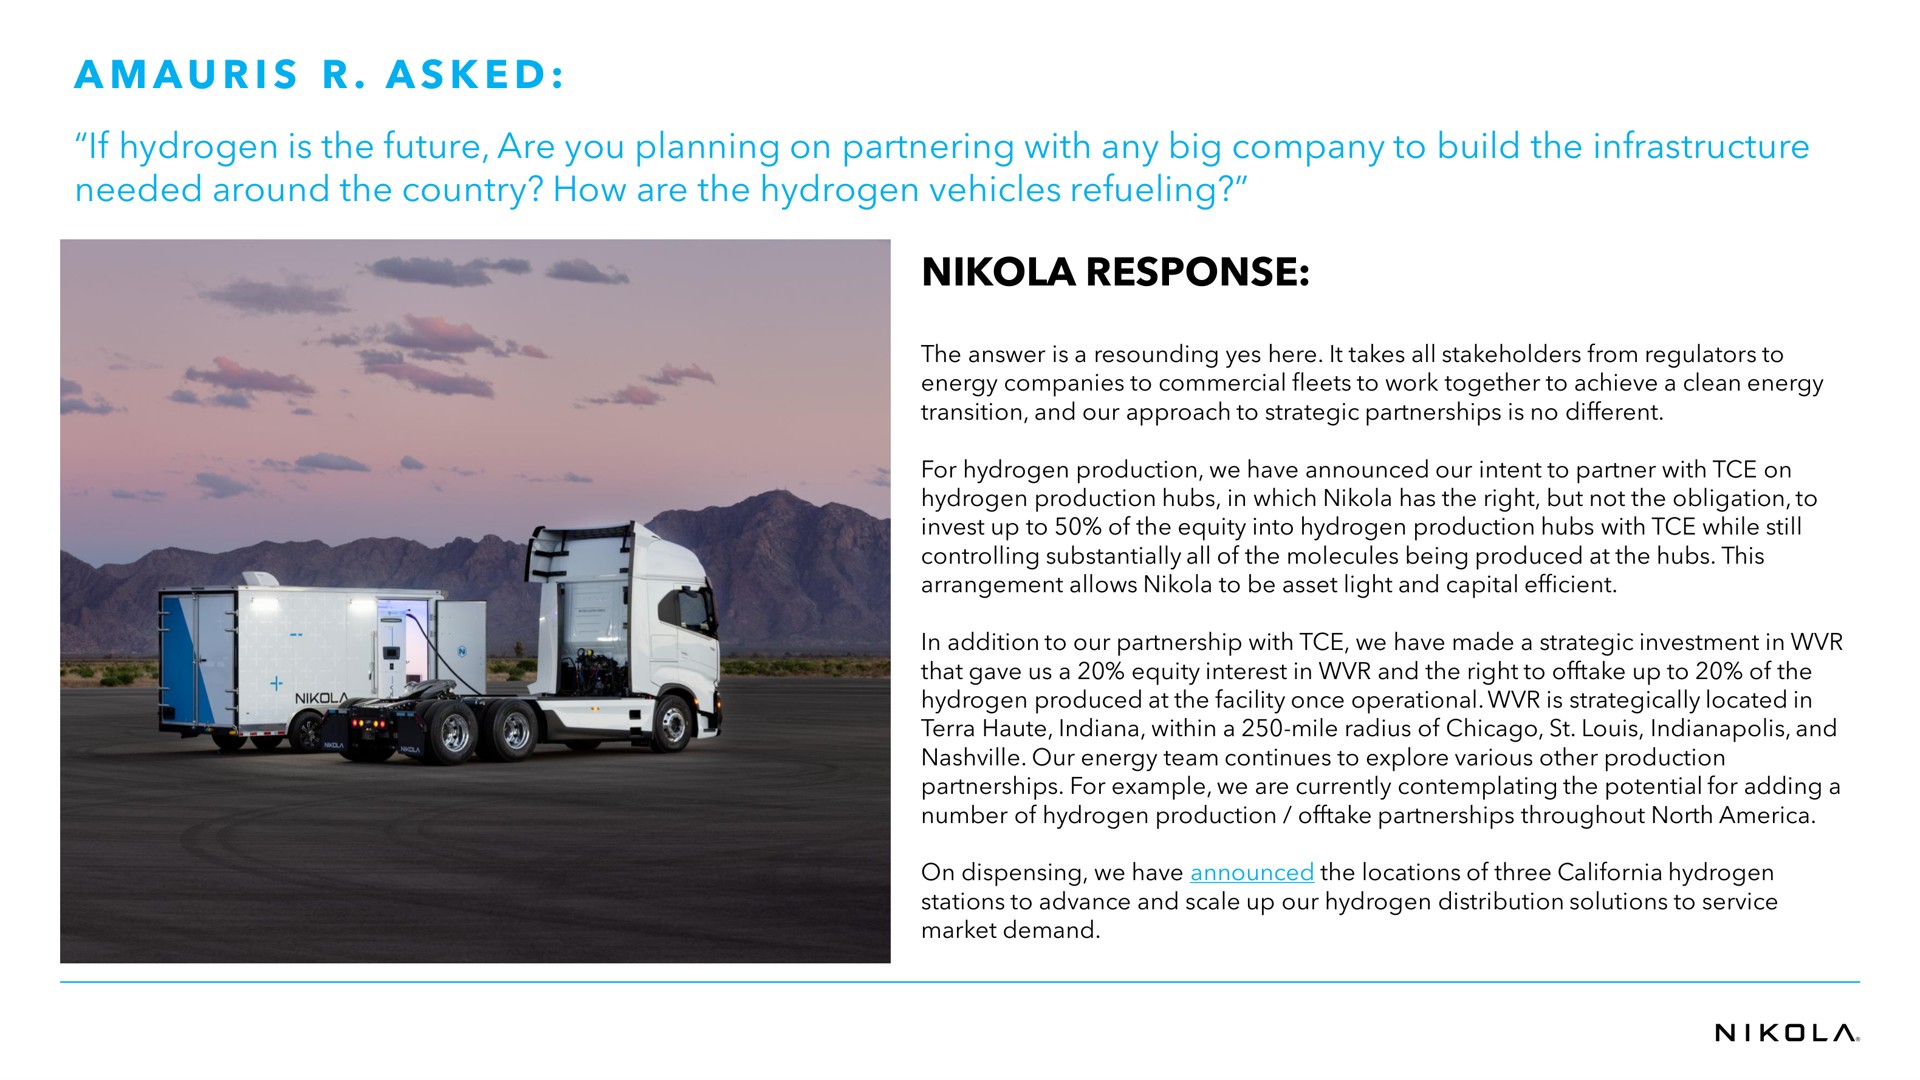 a a i a if hydrogen is the future are you planning on partnering with any big company to build the infrastructure needed around the country how are the hydrogen vehicles refueling response asked | Nikola